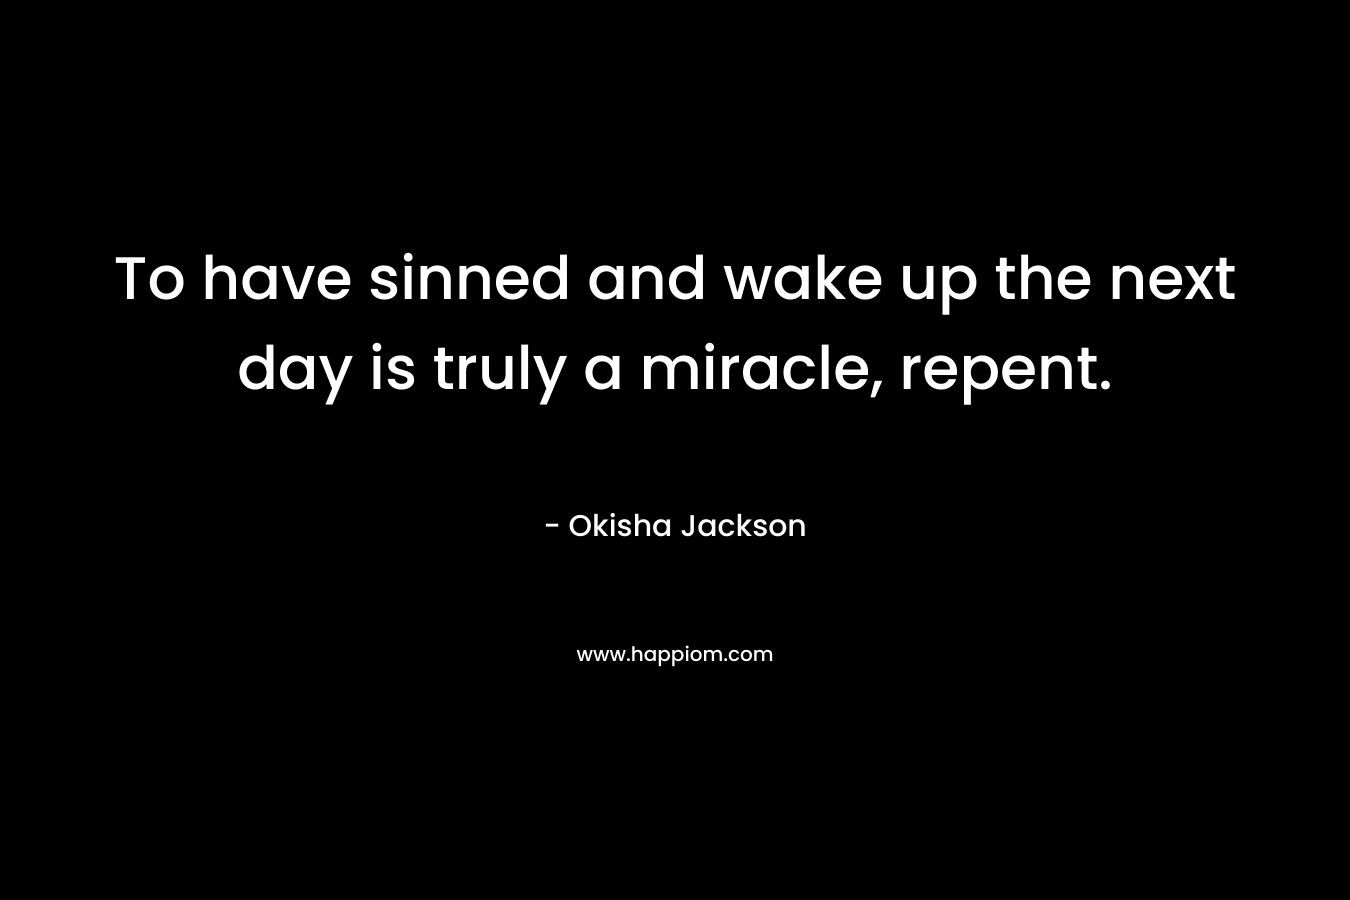 To have sinned and wake up the next day is truly a miracle, repent.